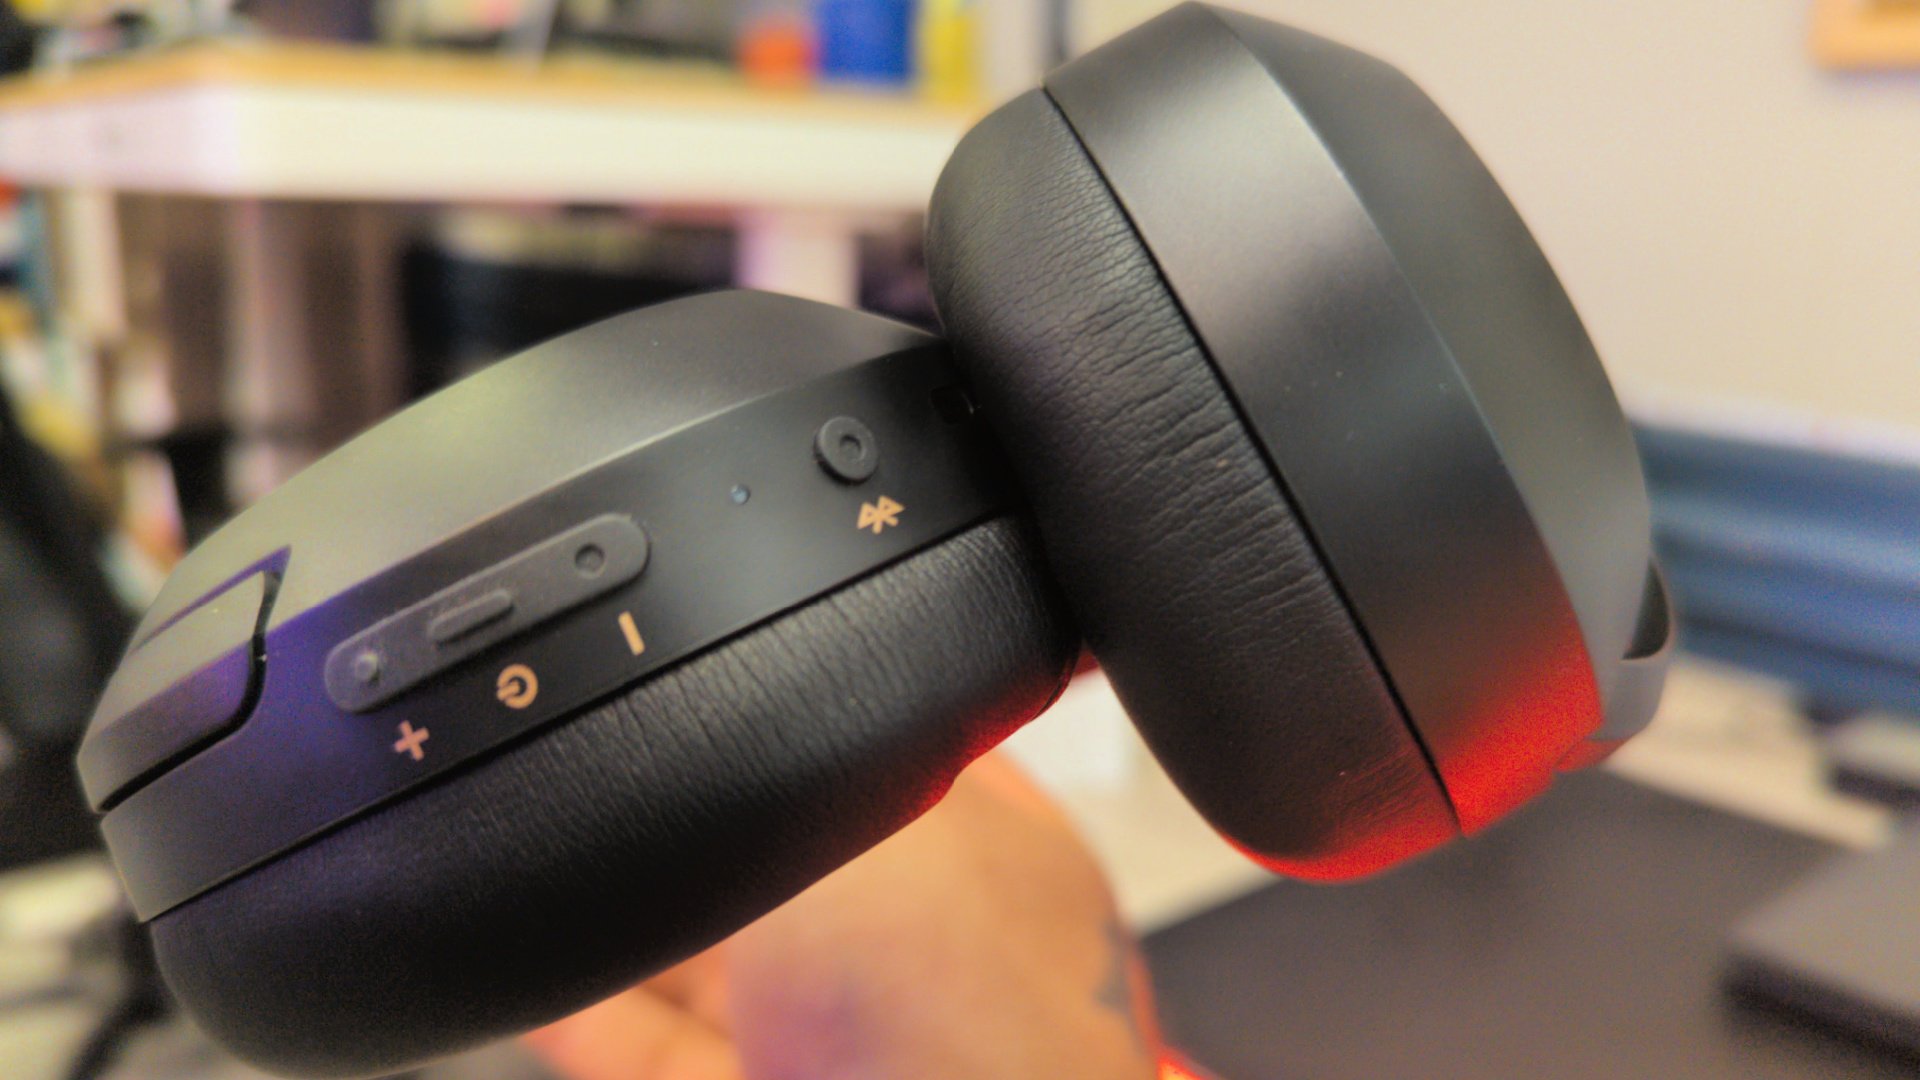 Edifier W820NB Active Noise Cancelling Bluetooth Headphones review